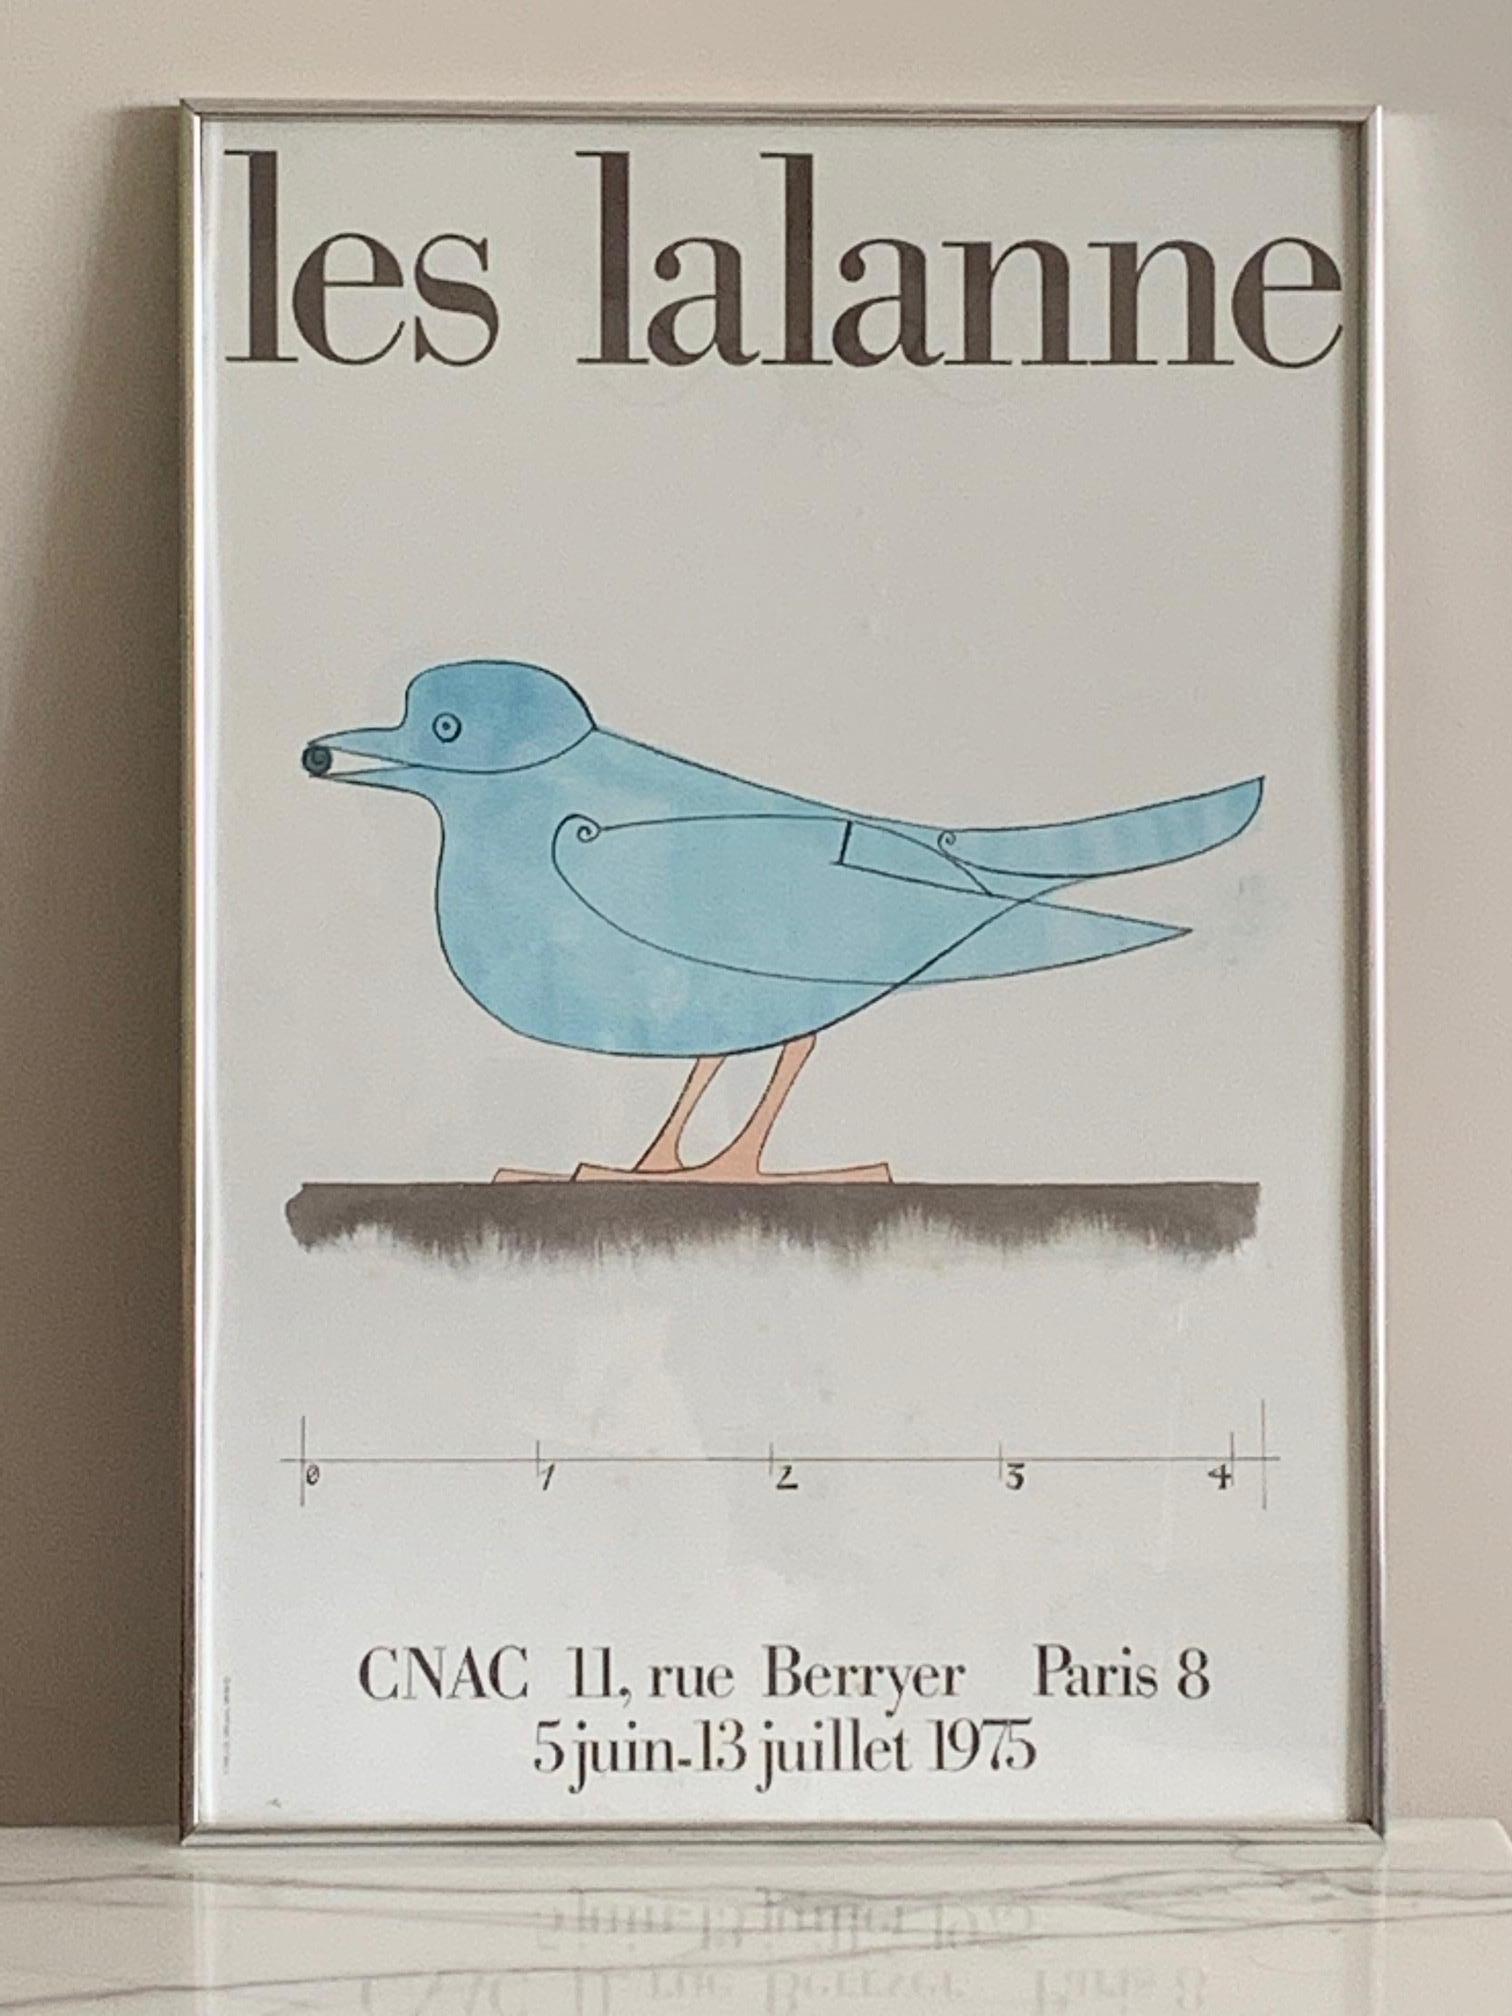 A classic vintage poster by Le Lalanne from a 1975 exhibit at CNAC, Paris. Mounted on board and framed.